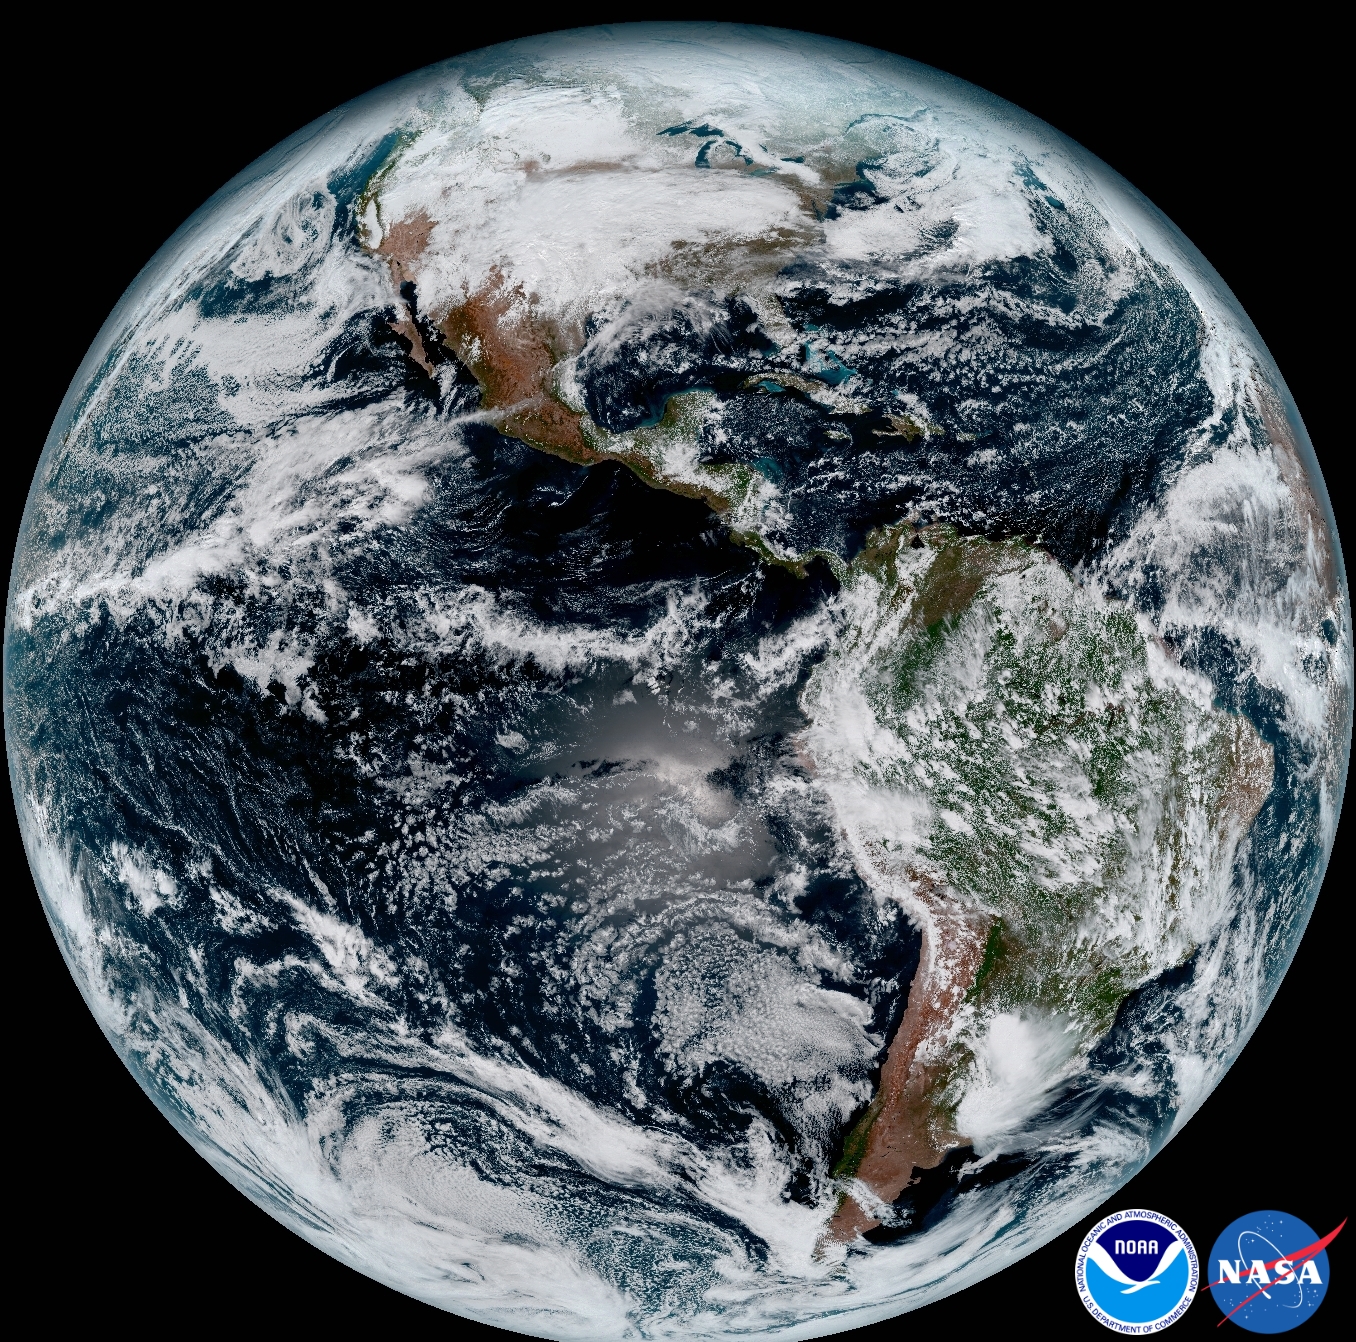 NOAA’s GOES-16 Satellite Sends First Images to Earth